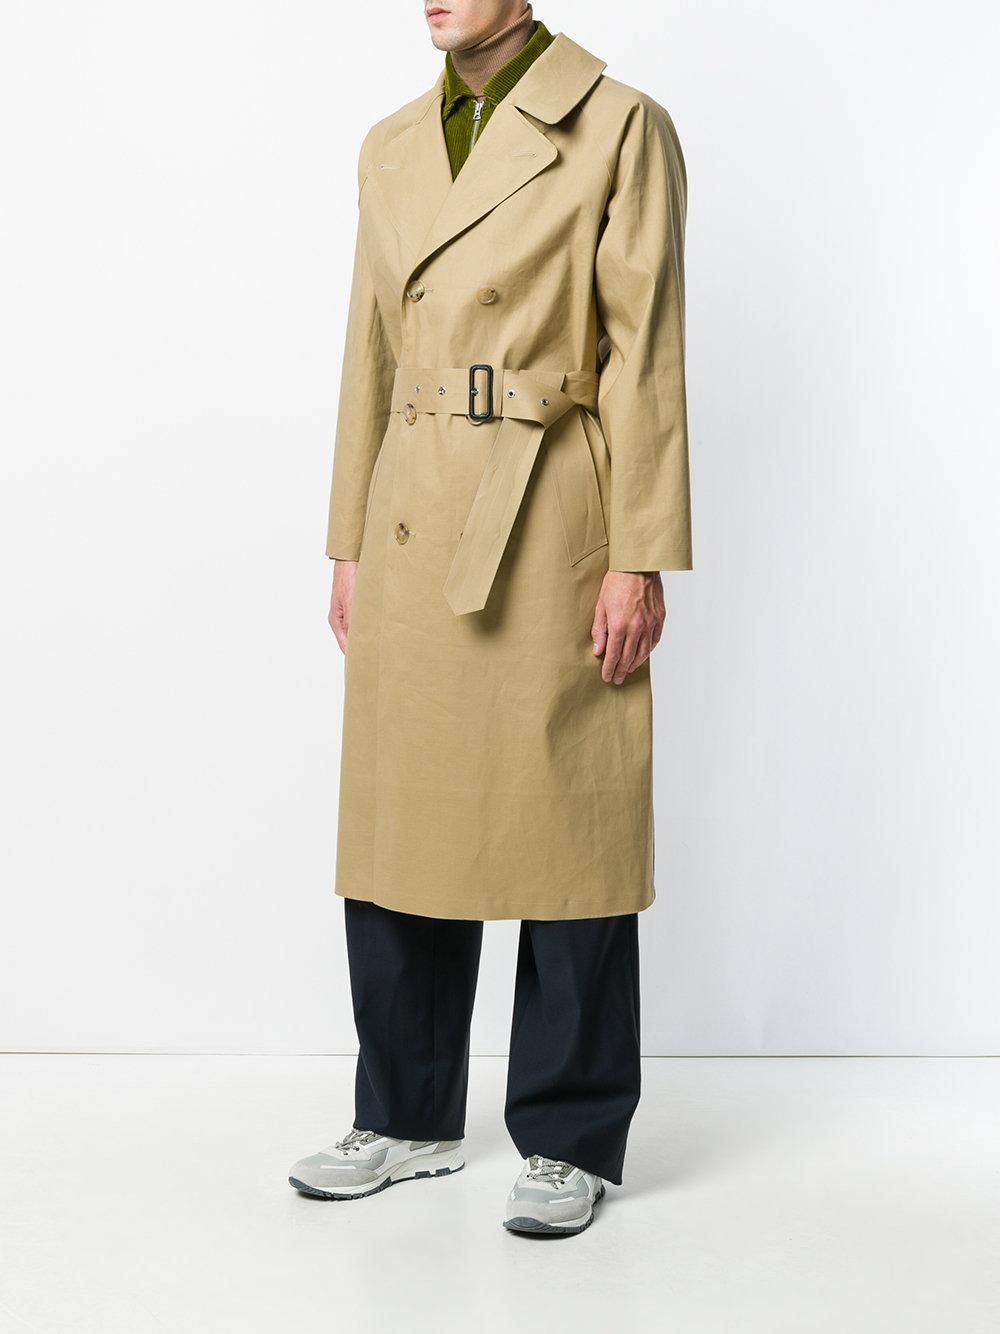 Mackintosh Cotton Kelp Trench Coat in Natural for Men - Lyst